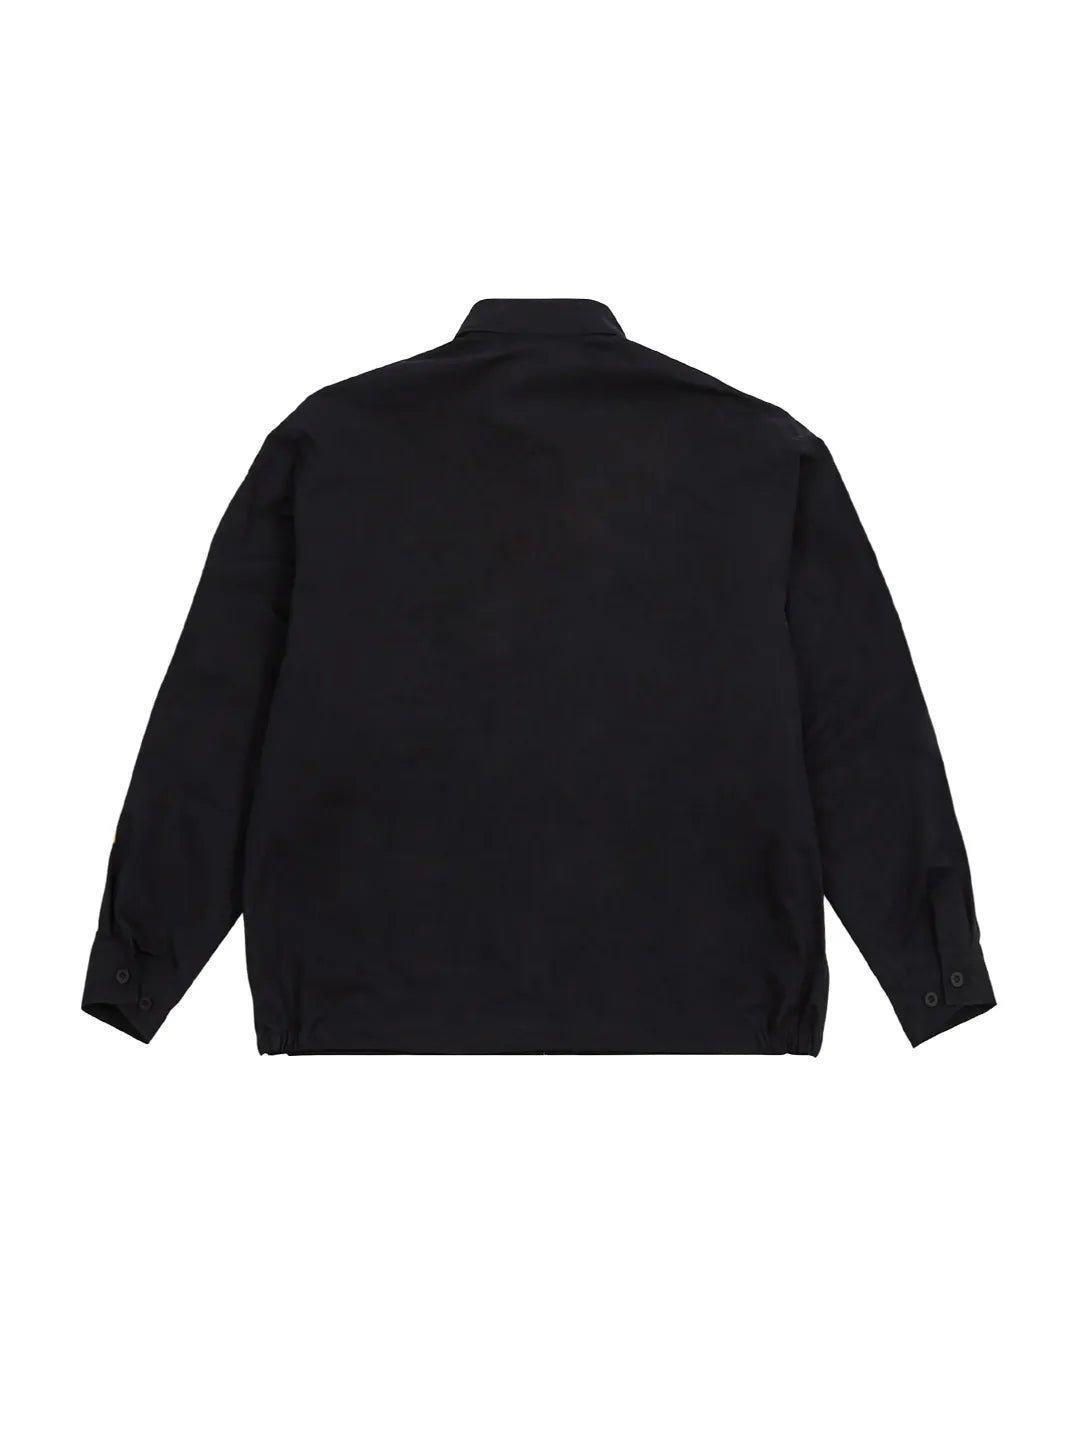 Space available Utopia Work Jacket - Black - SUPERCONSCIOUS BERLIN